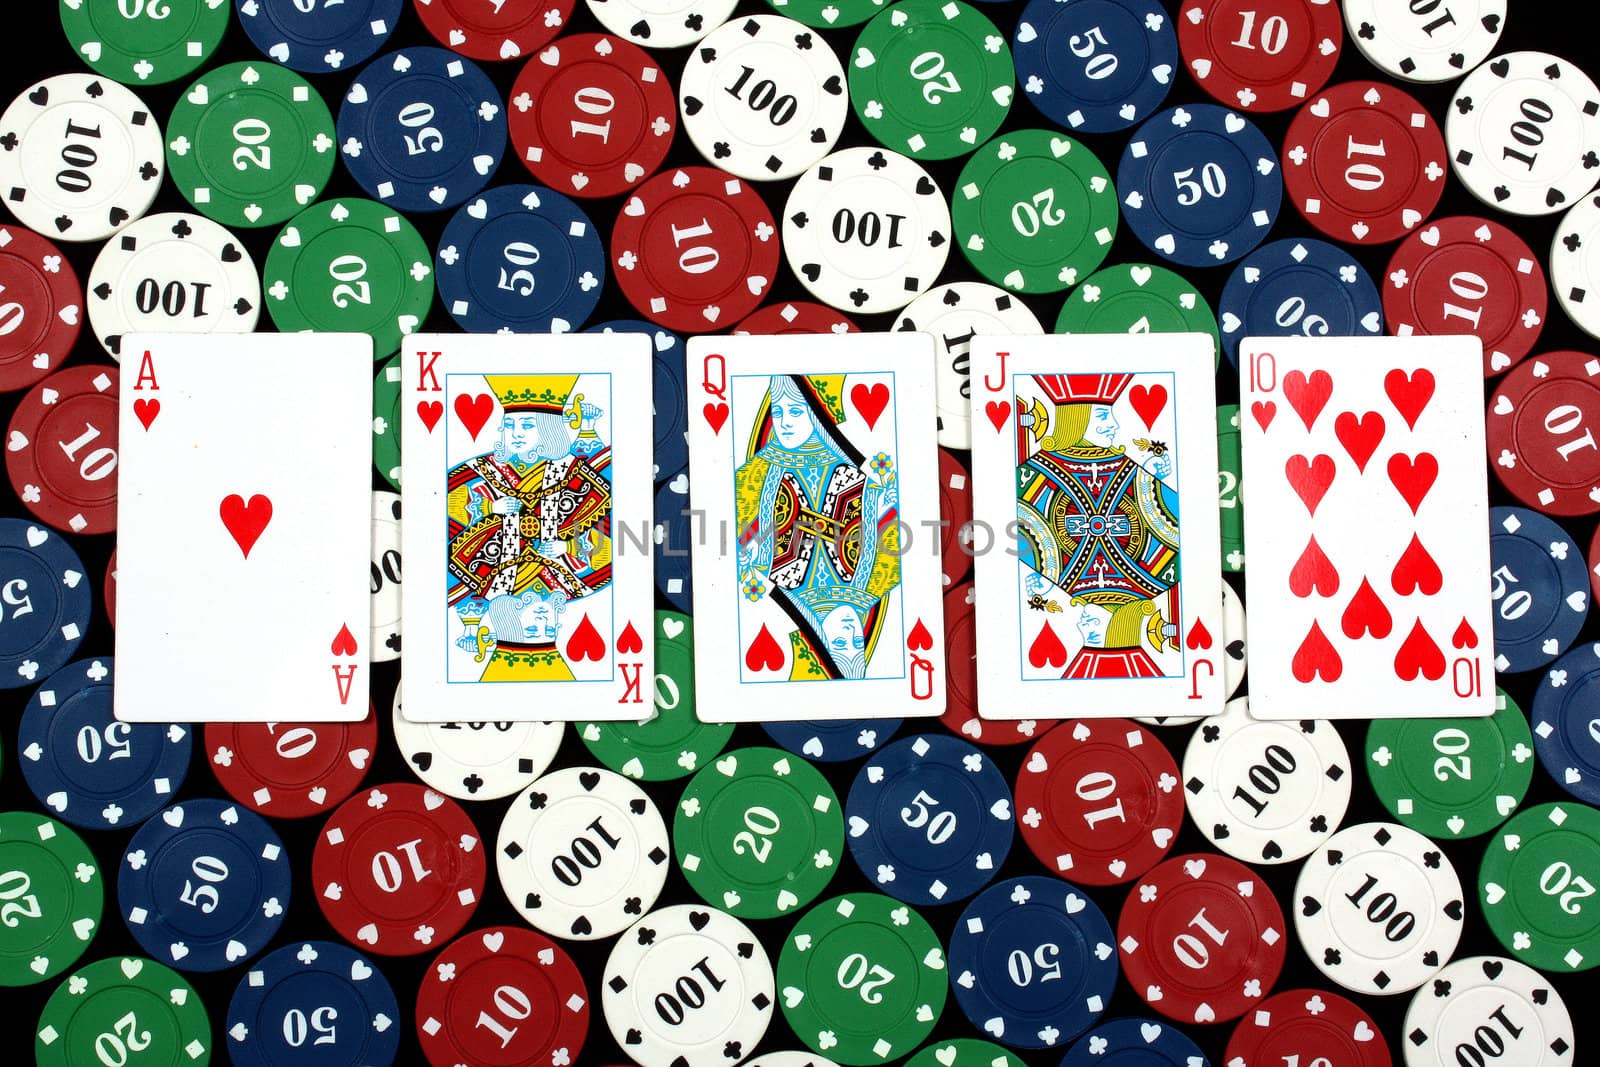 A poker hand of royal flush on the background of casino chips.